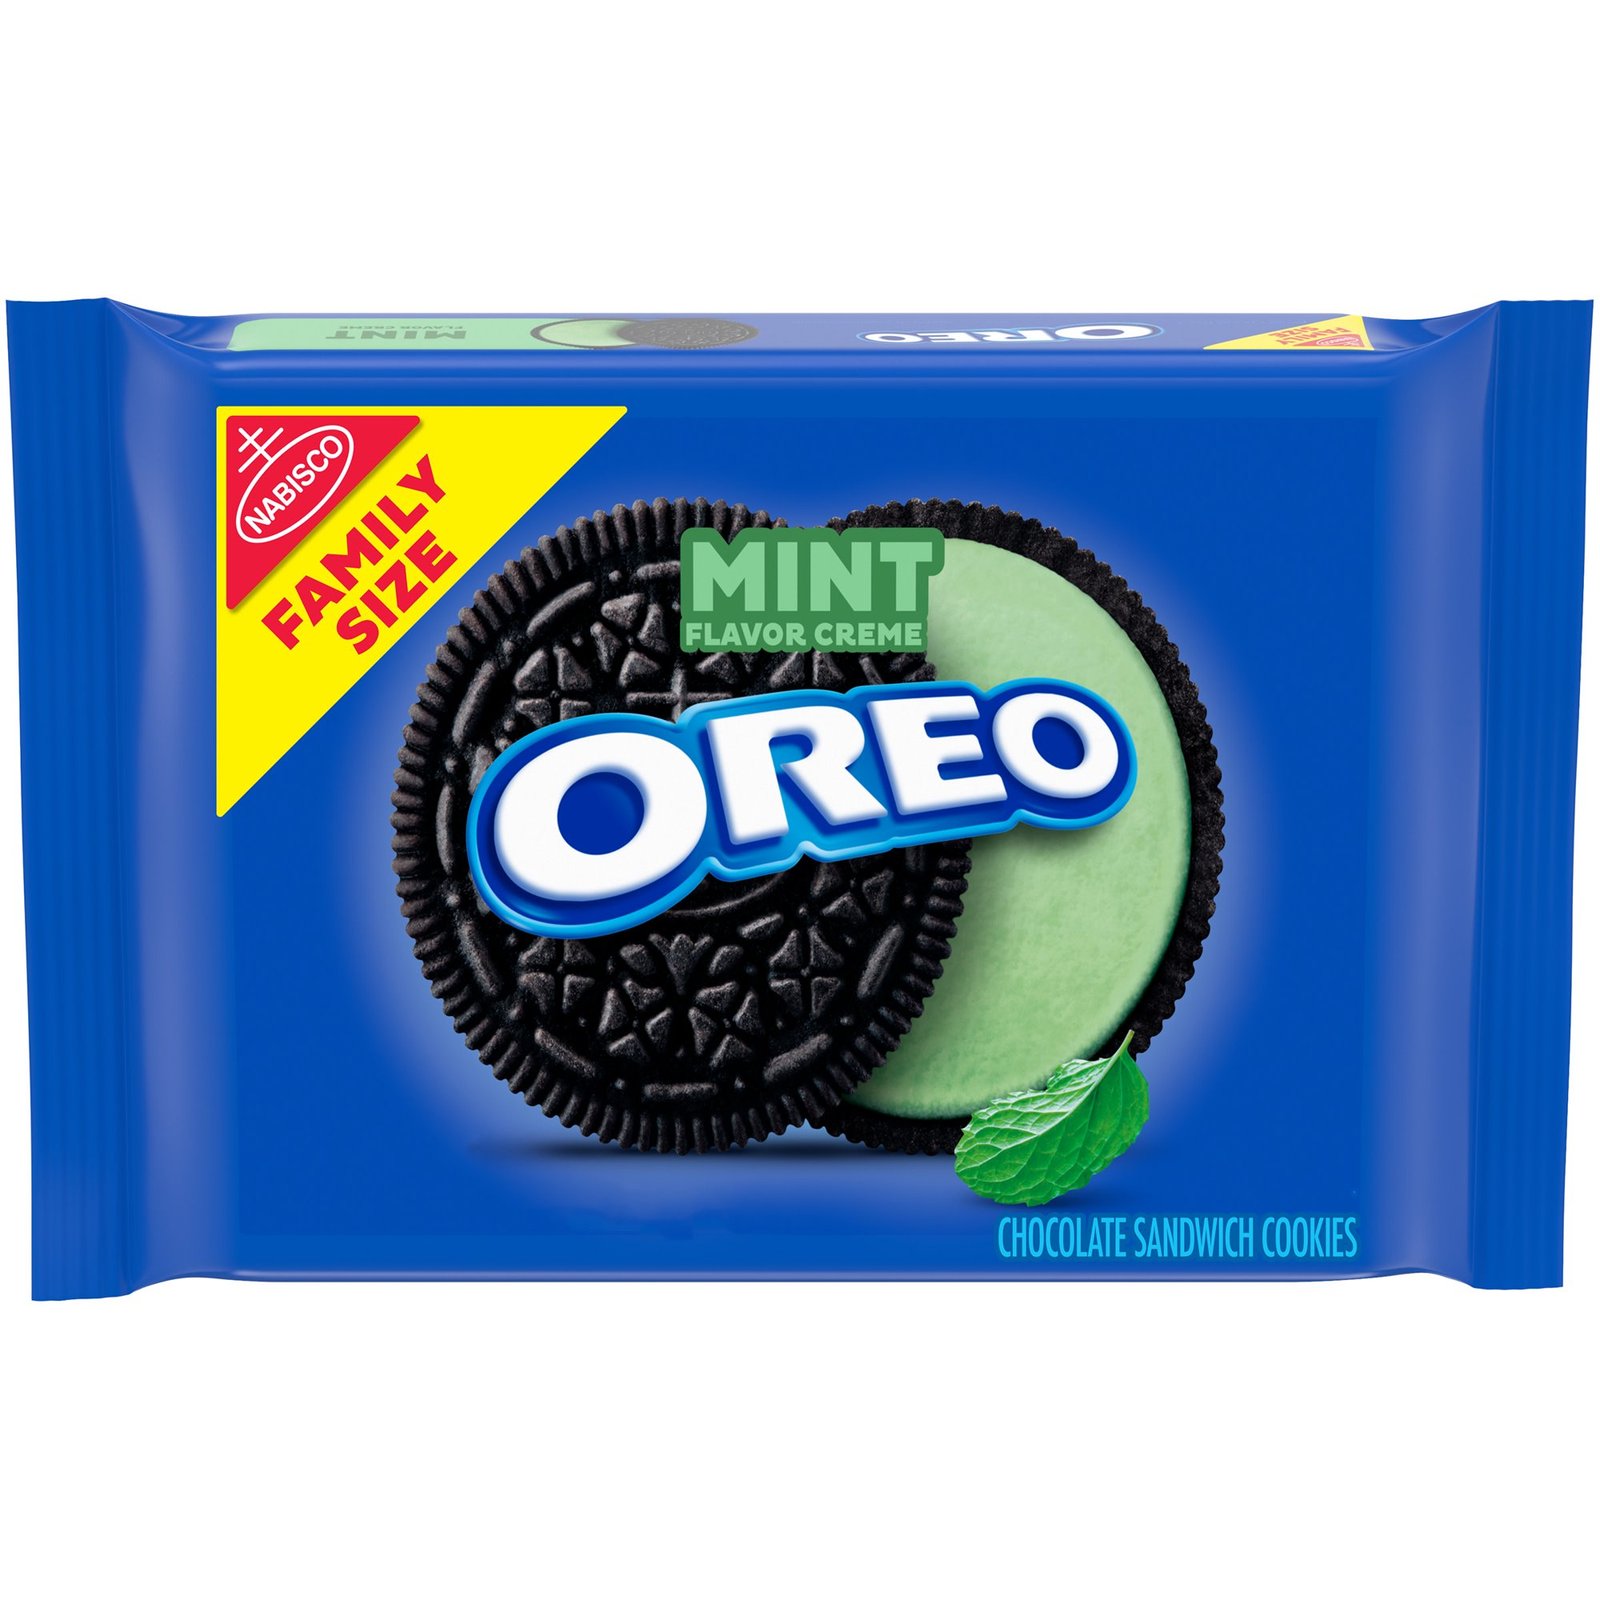 OREO Mint Flavored Creme Chocolate Sandwich Cookies Family Size Pack - 20 oz.